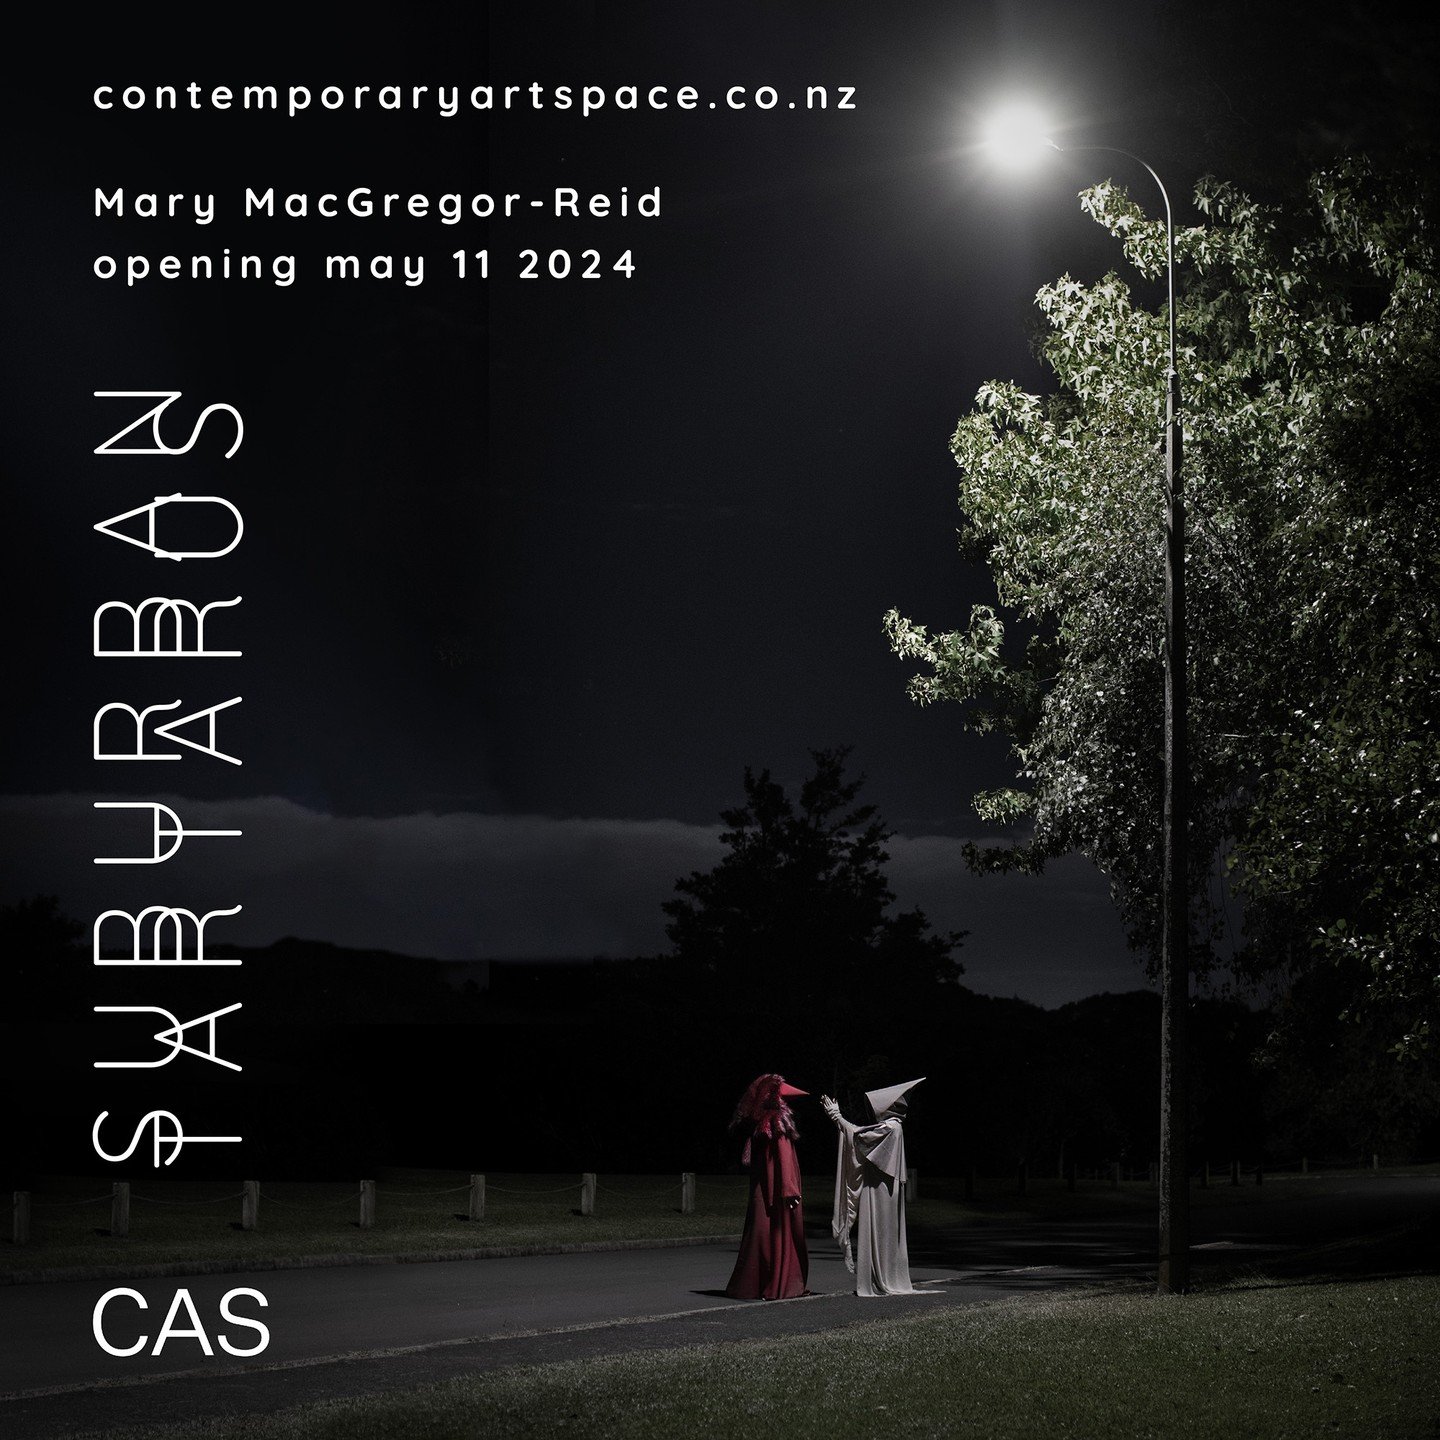 New photographic works at CAS Gallery in New Plymouth May-June. Opening May 11th at 5pm.
Suburban Tartarus captures the odd glimpses seen under streetlights when walking late at night. 74 Powderham Street, New Plymouth
@casgallerytaranaki #photograph